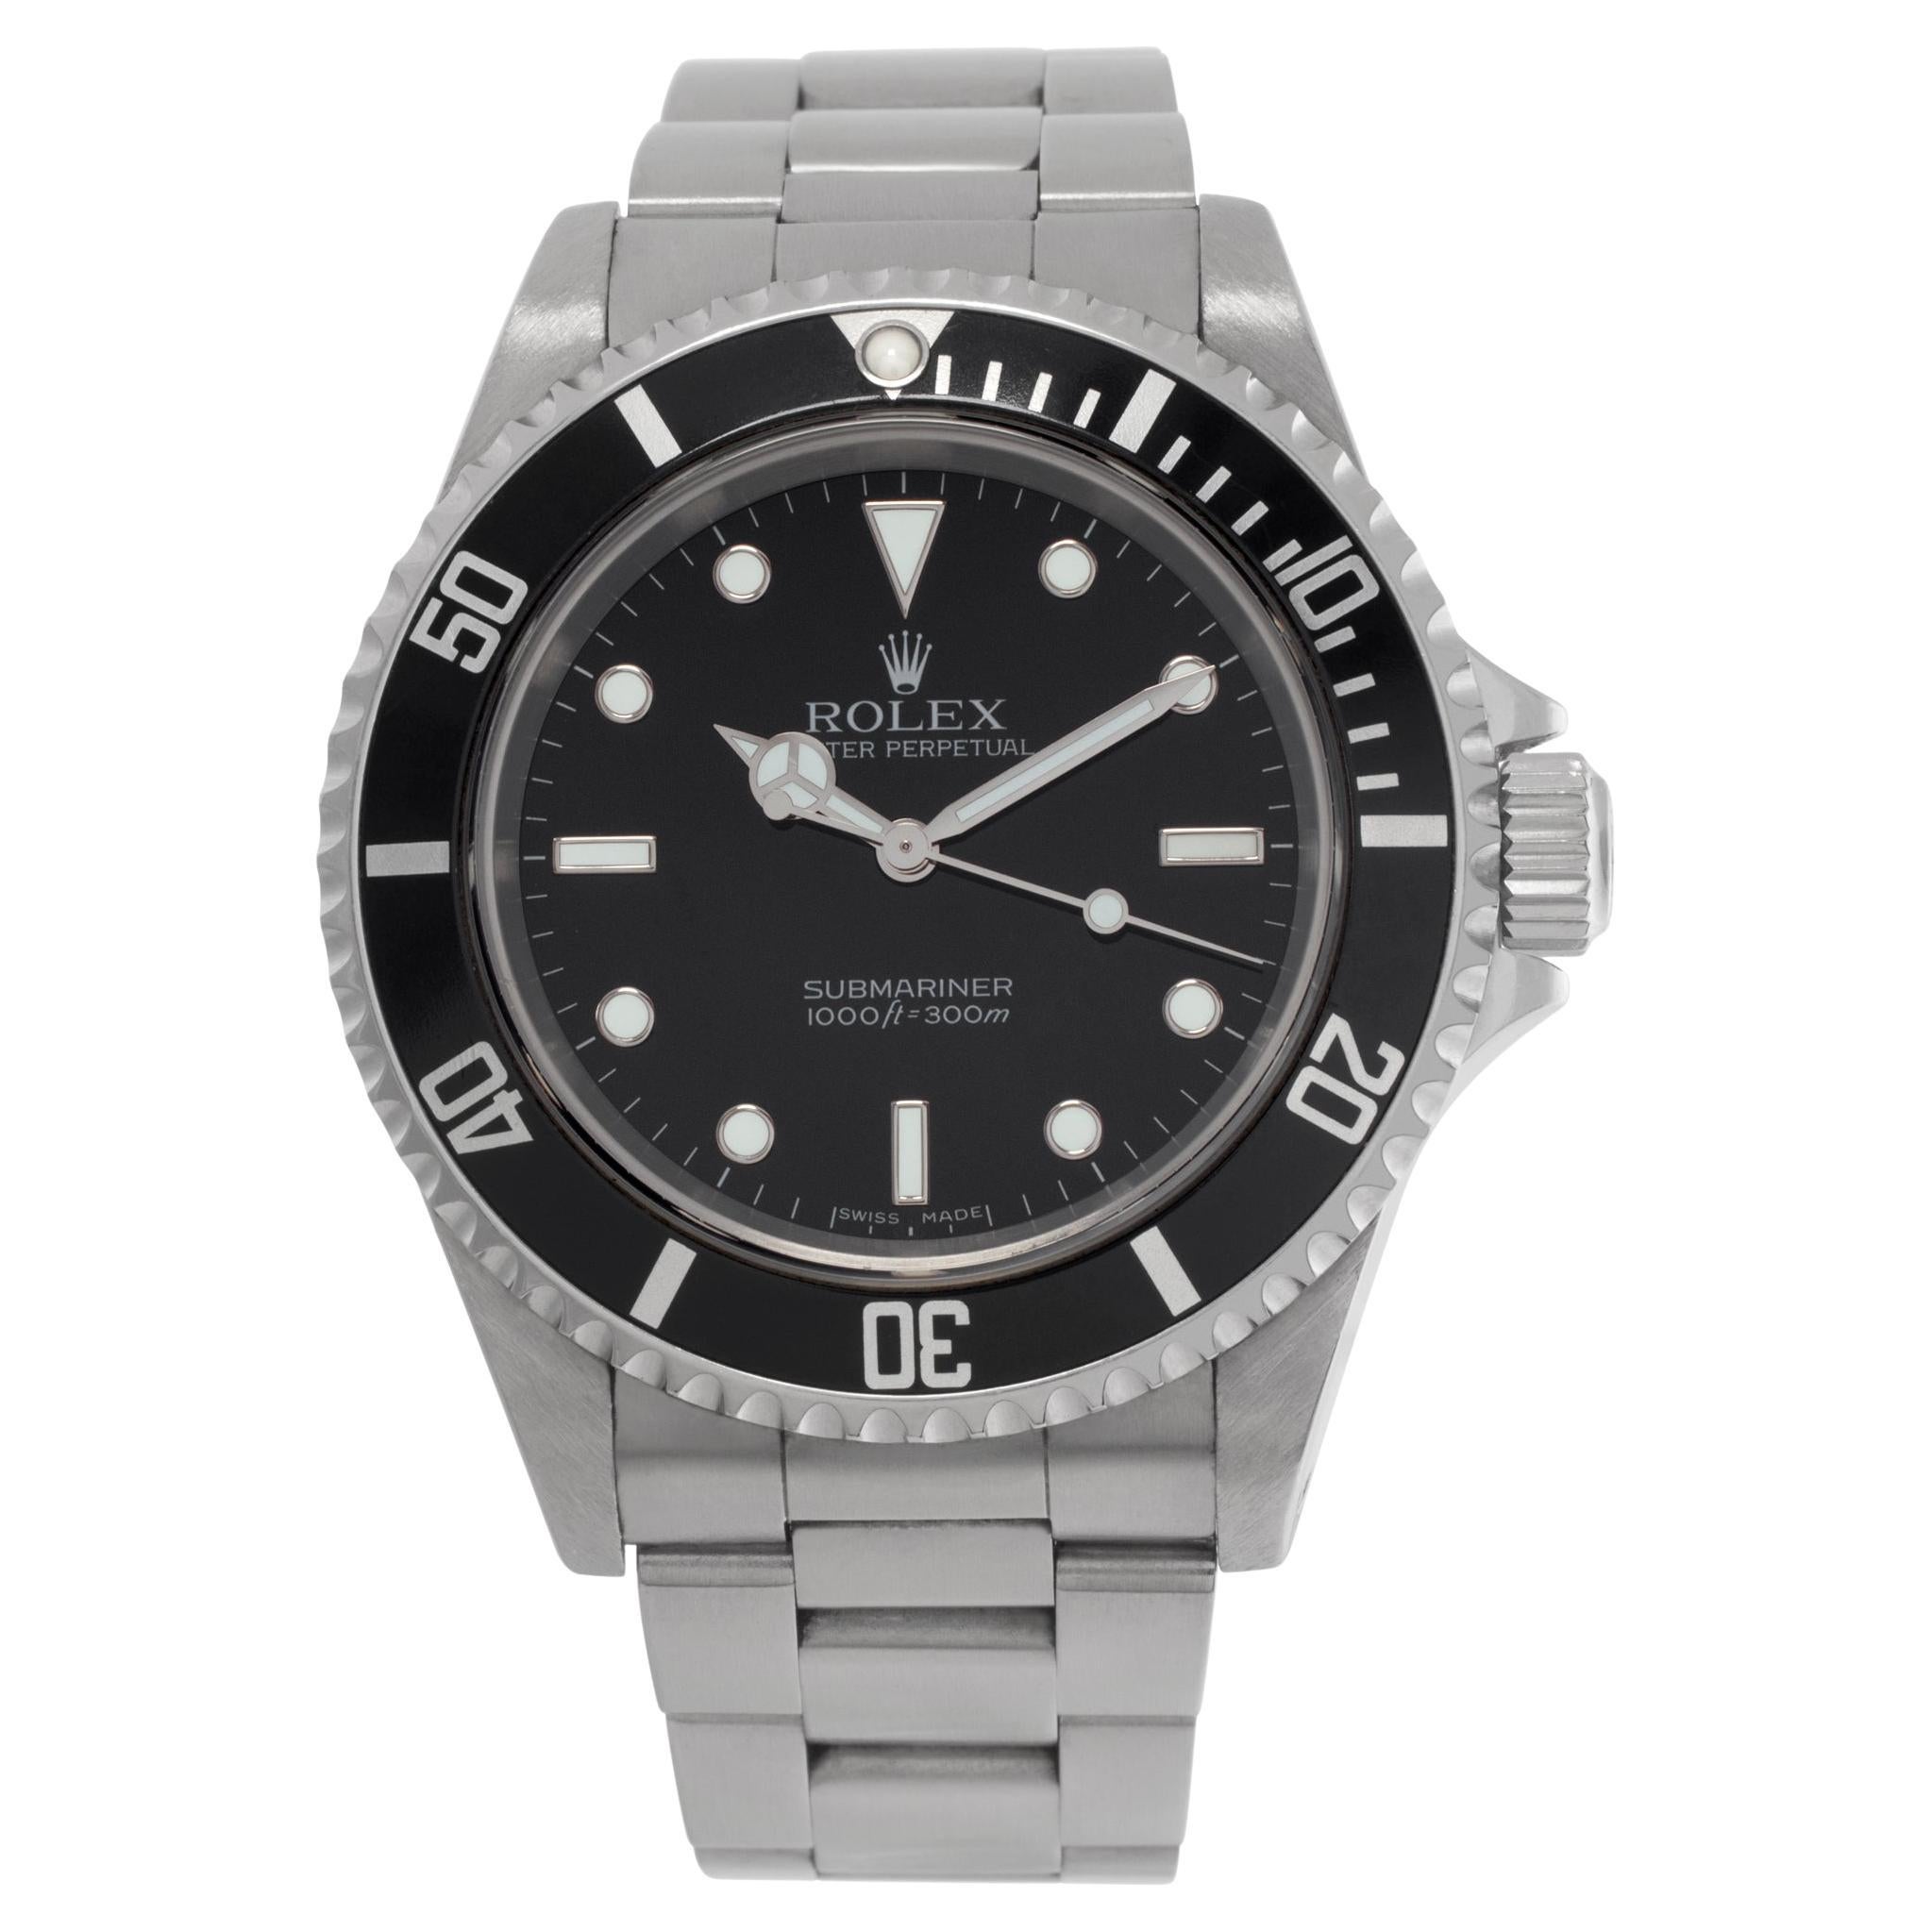 Rolex Submariner No Date 14060m Automatic Watch Stainless Steel